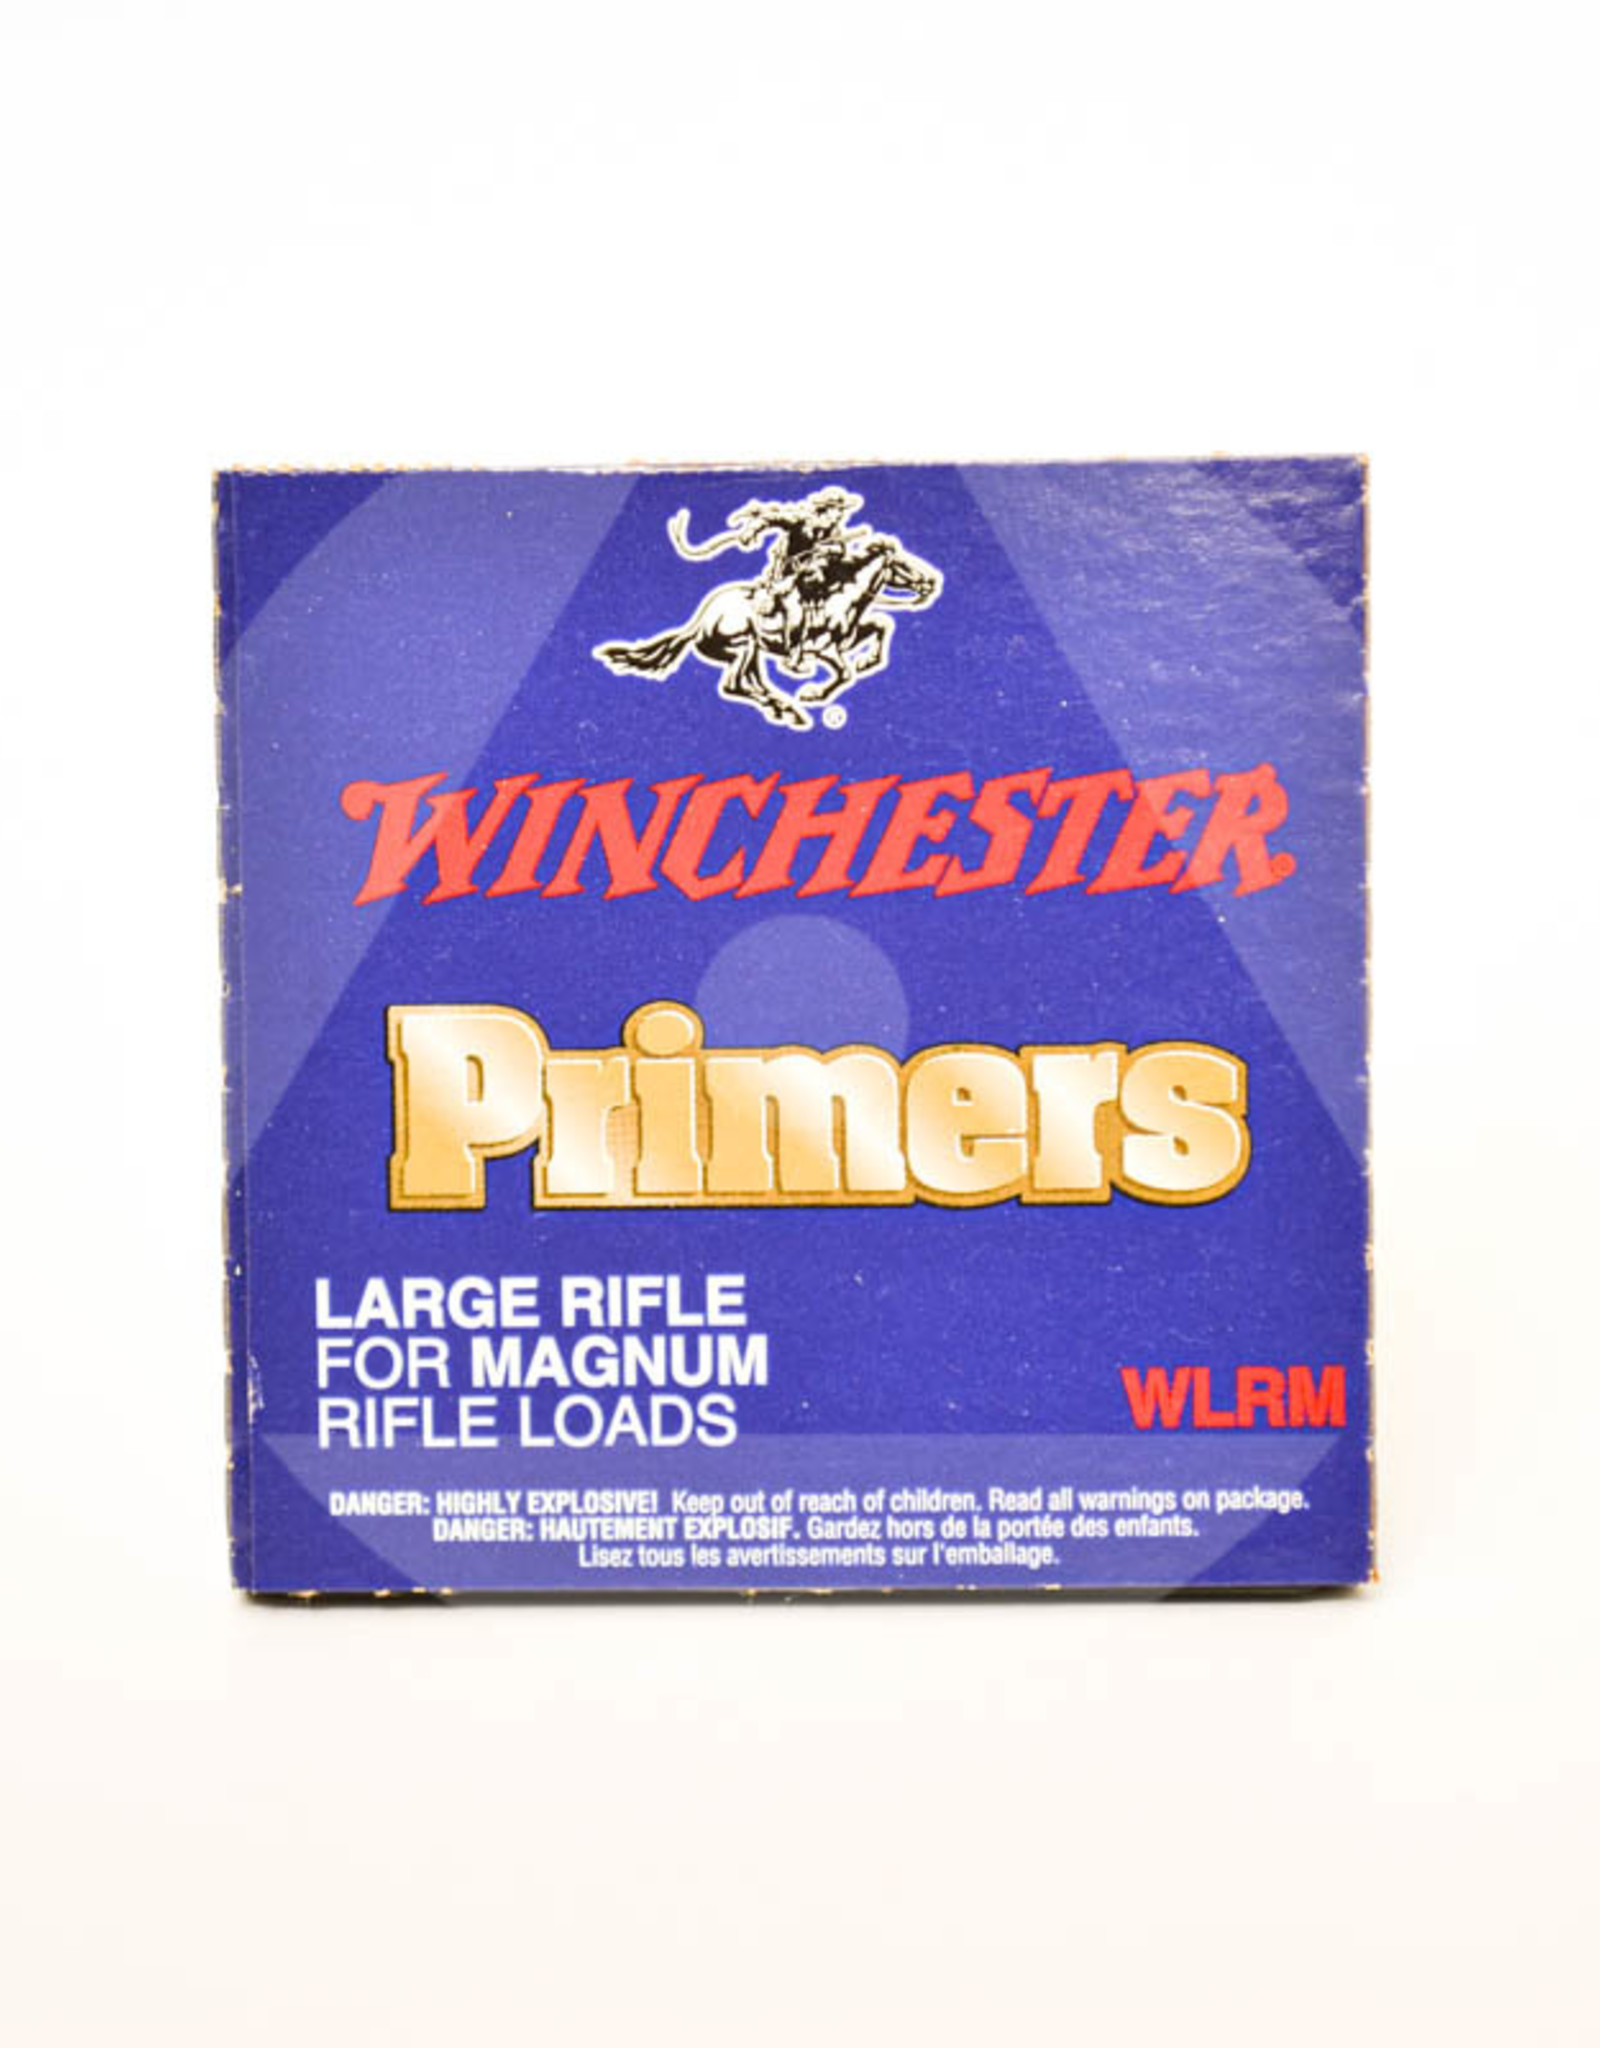 Winchester Primers Large Rifle Magnum 1000